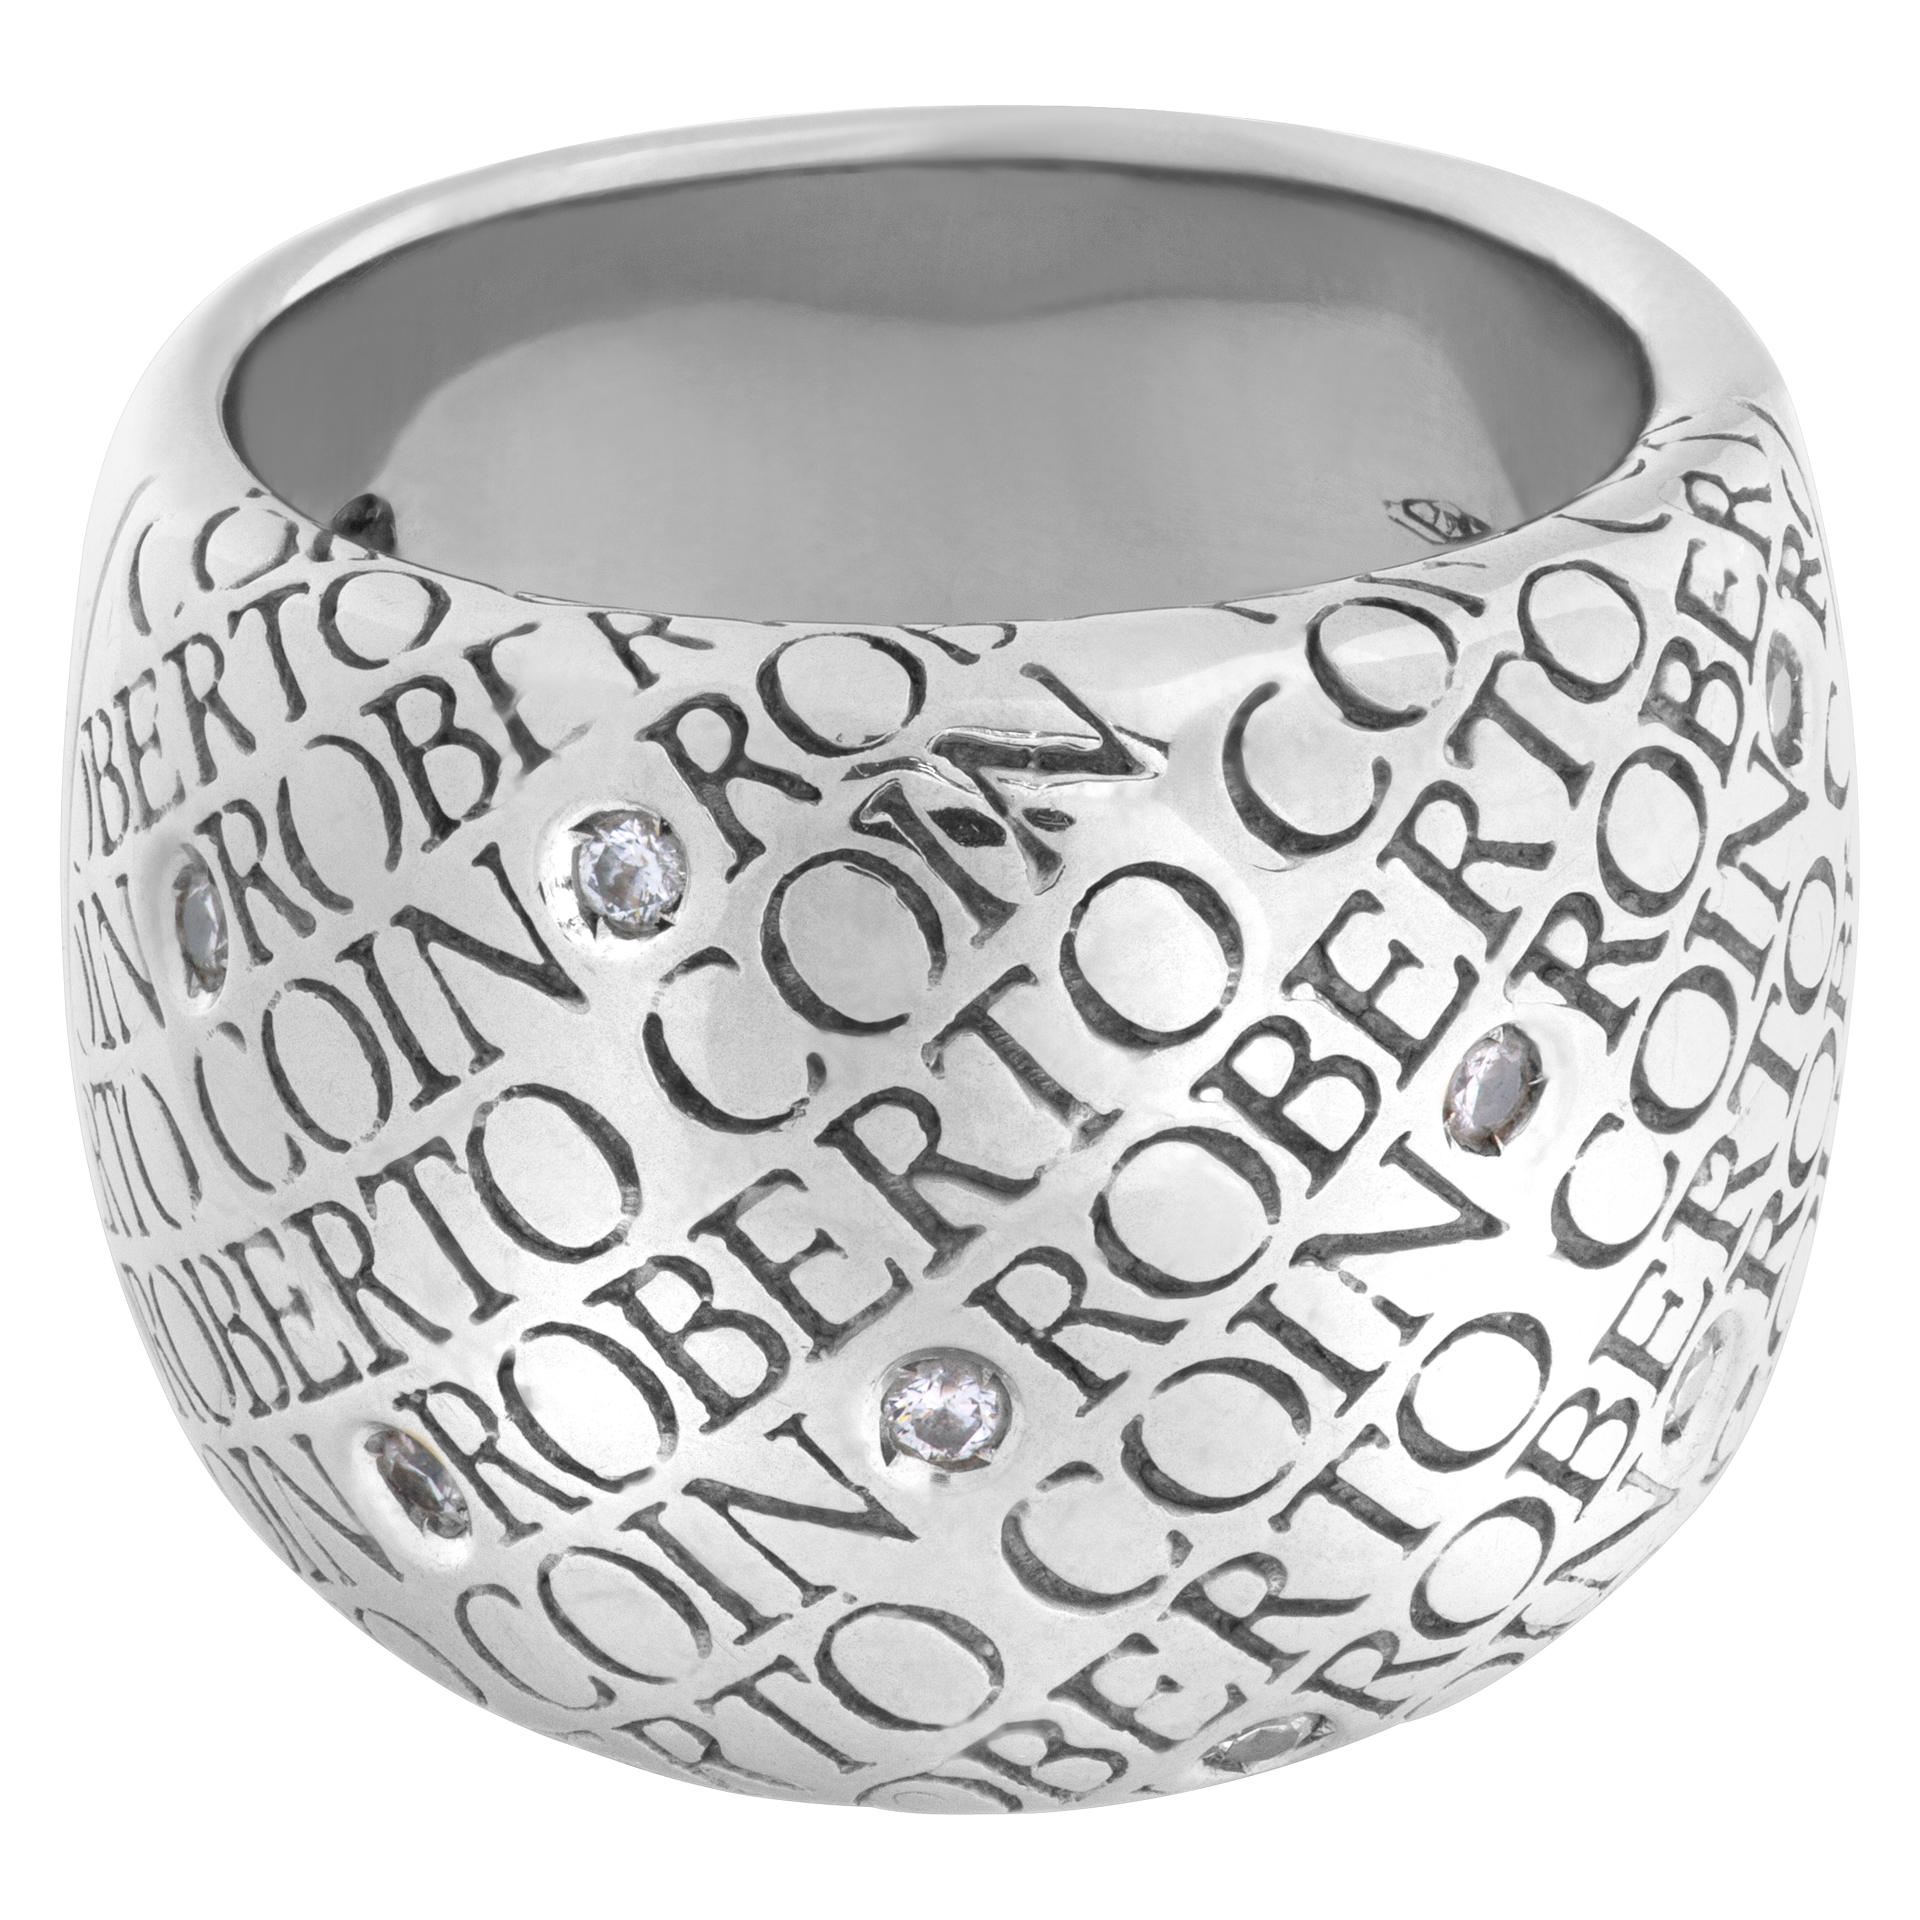 Roberto Coin ring in 18k white gold with 9 diamonds image 1